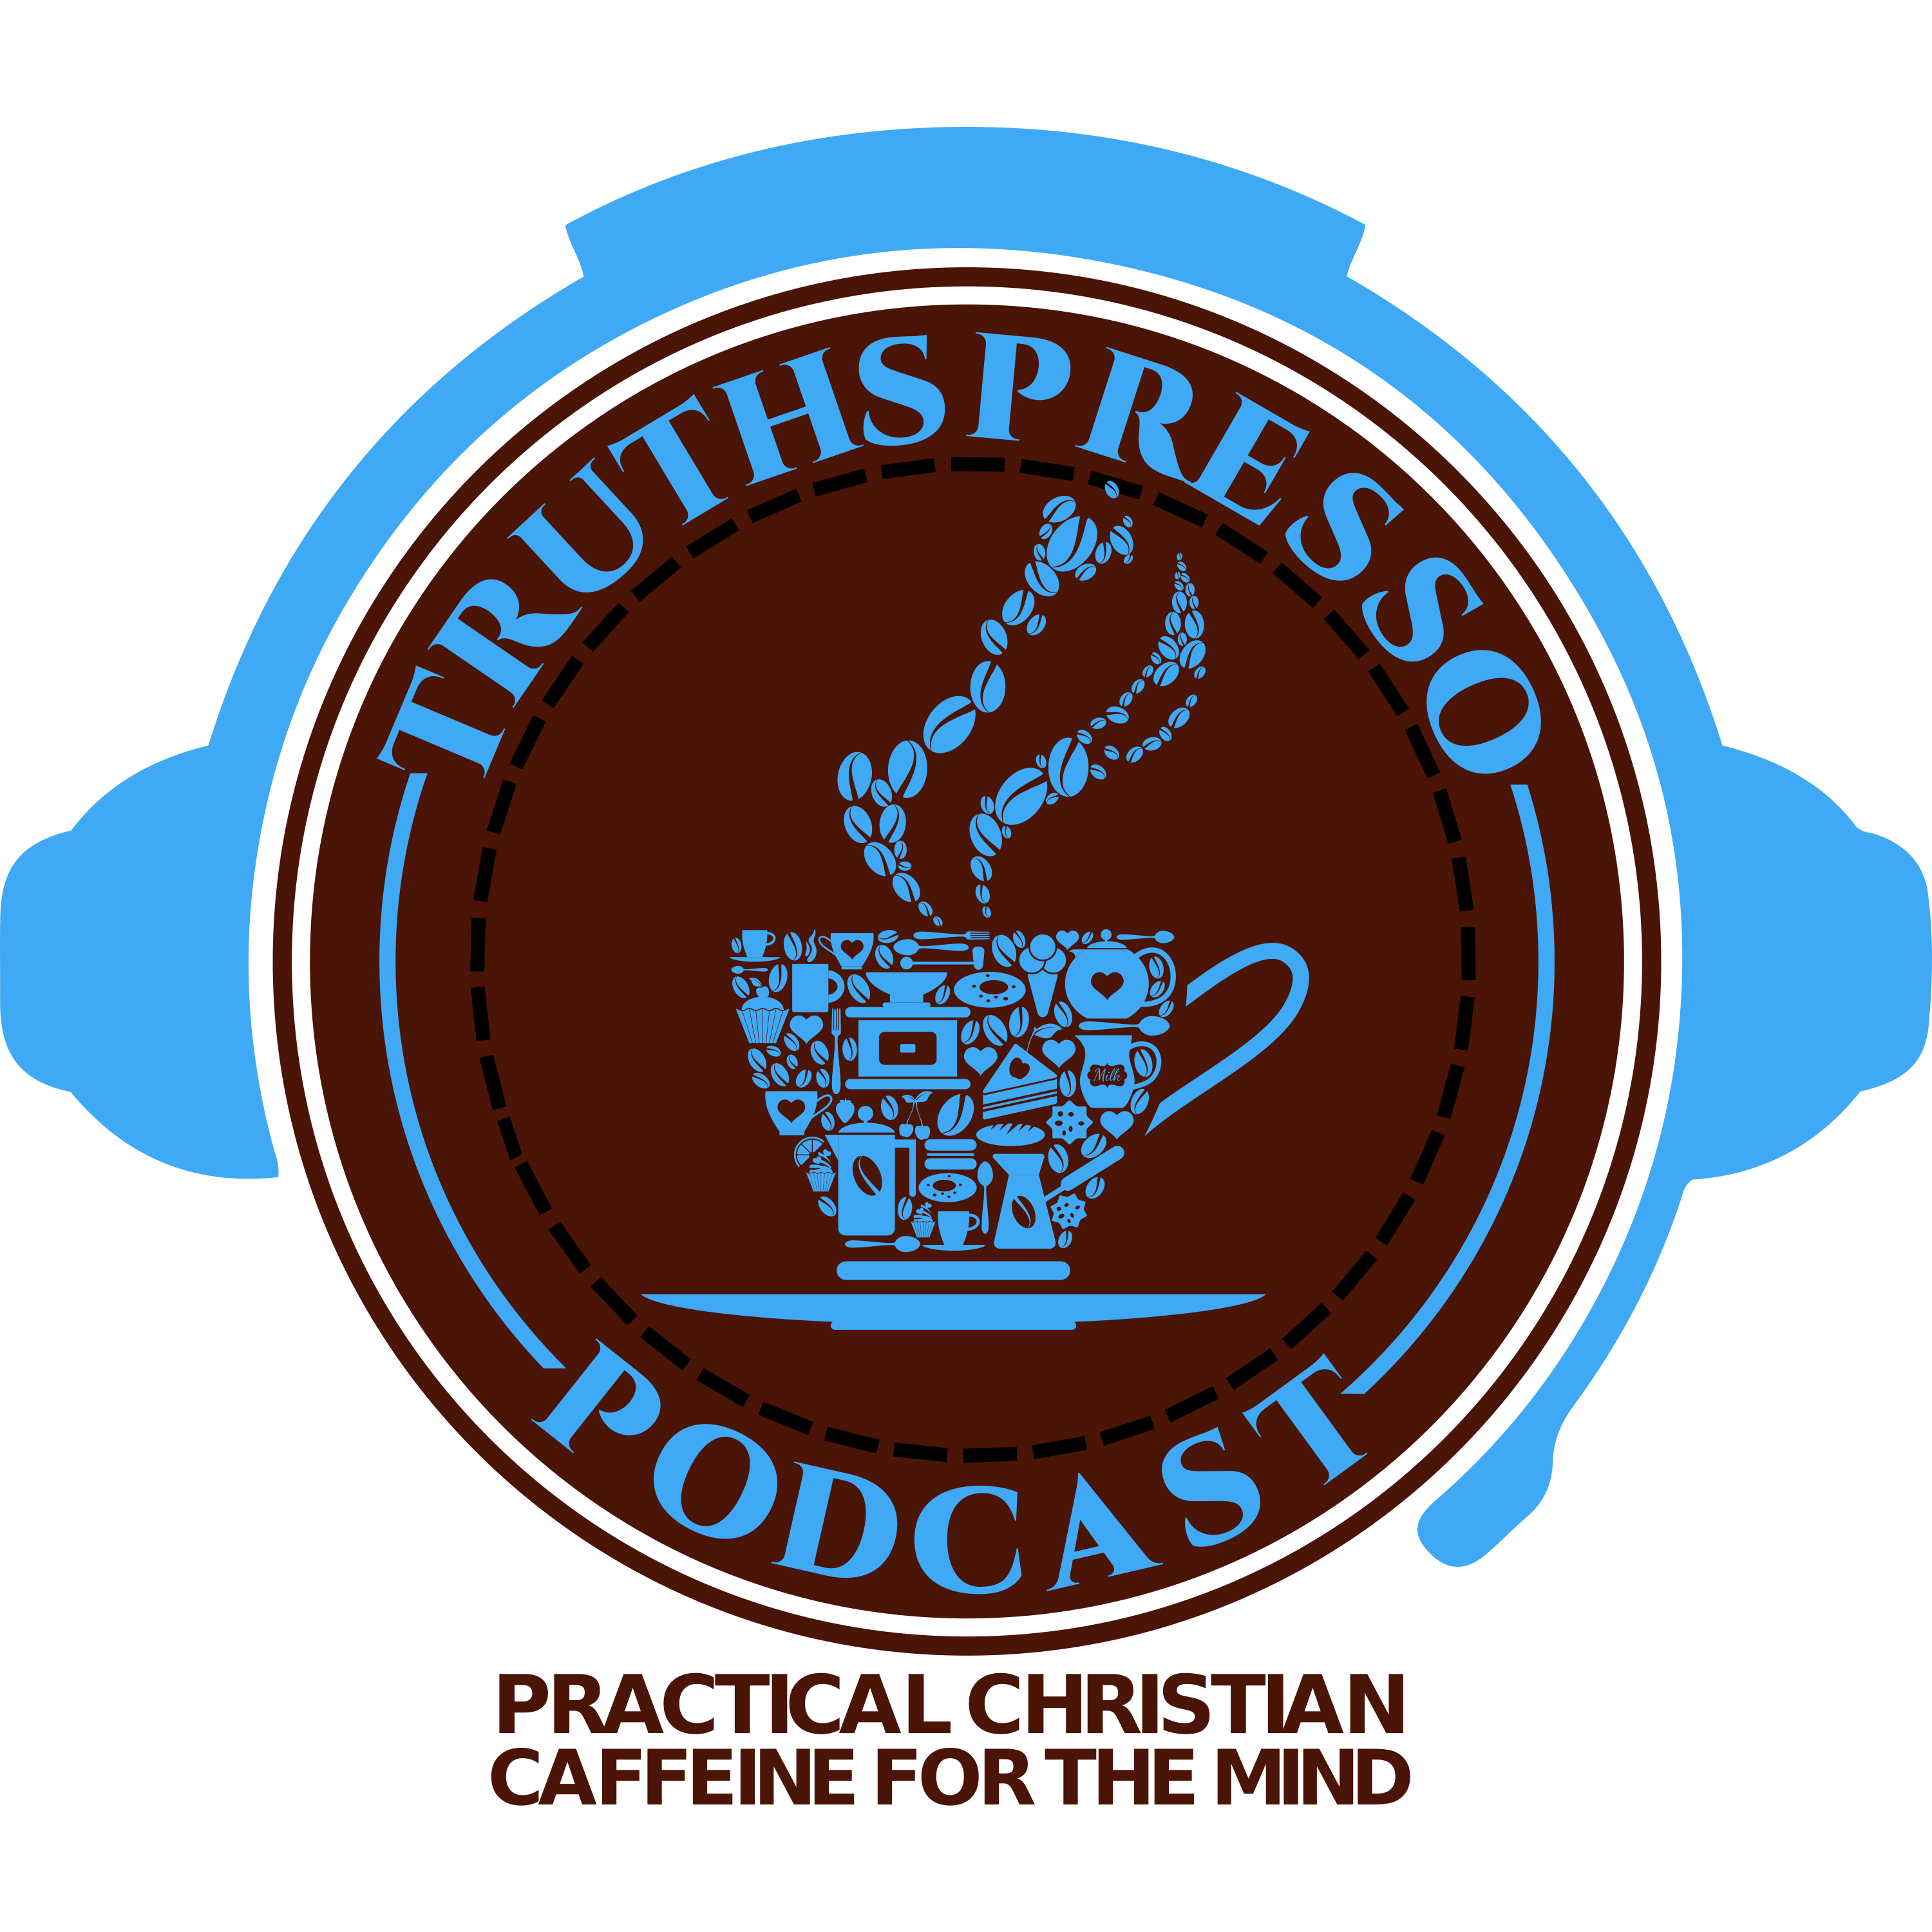 The Truthspresso Podcast